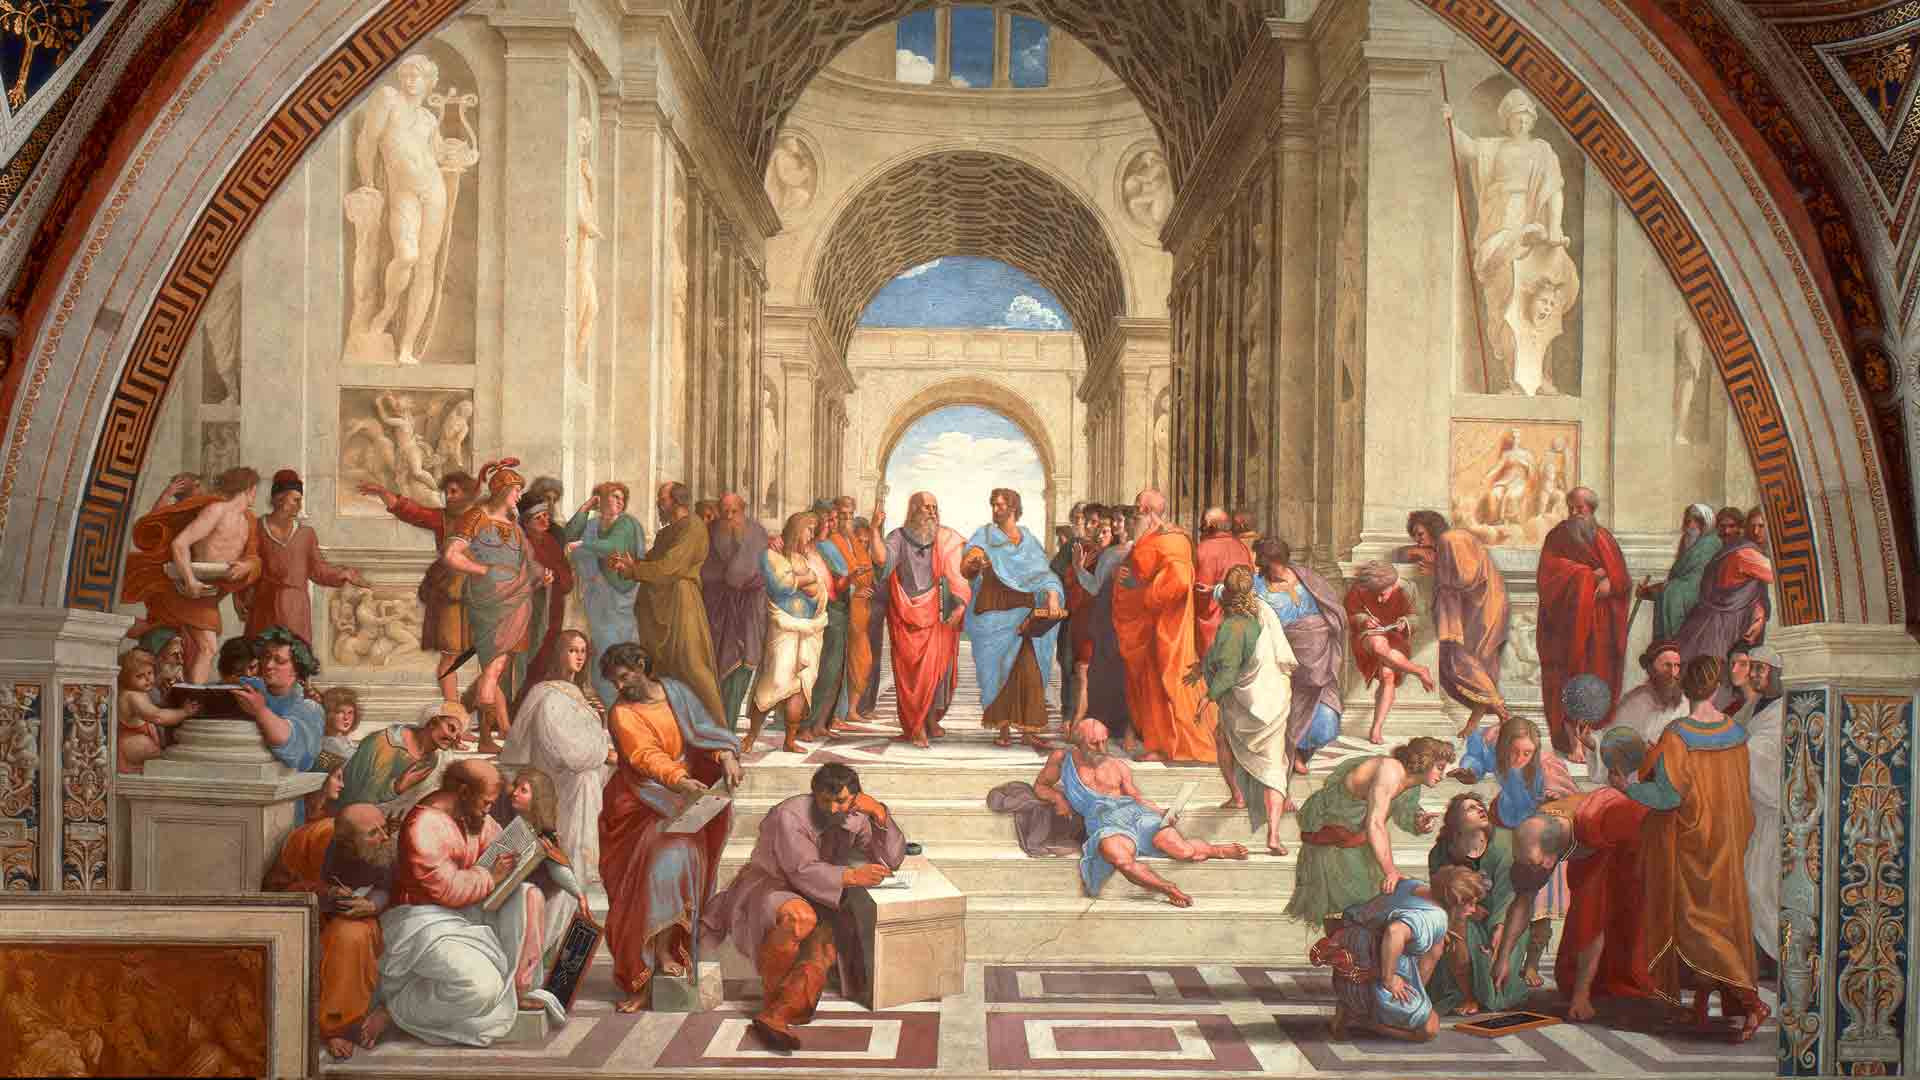 The School of Athens, fresco detail, 1509–1511, by Raphael, at the Vatican Apostolic Palace, Rome, Italy (CC0 1.0)